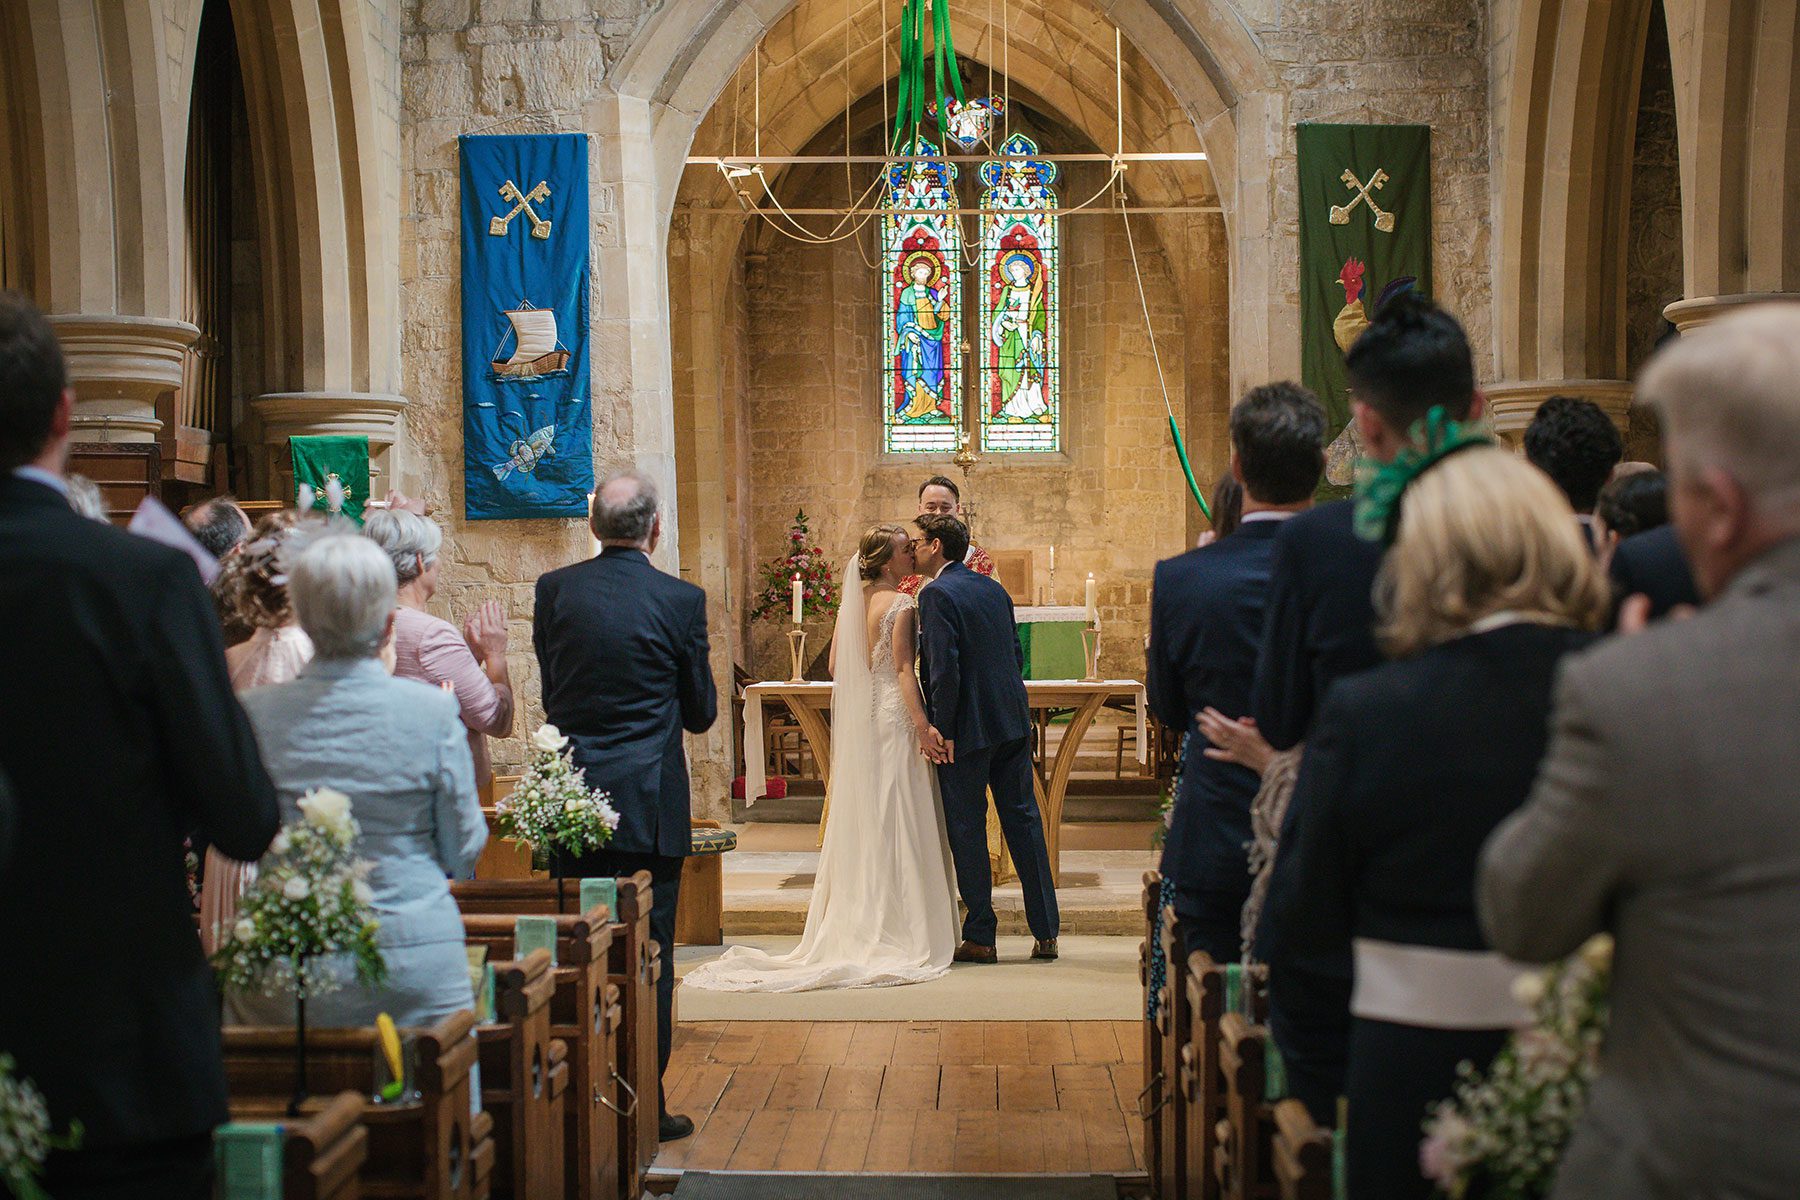 The Kiss - Reportage Wedding Photography in Cheltenham, Gloucestershire & the Cotswolds | Bullit Photography.